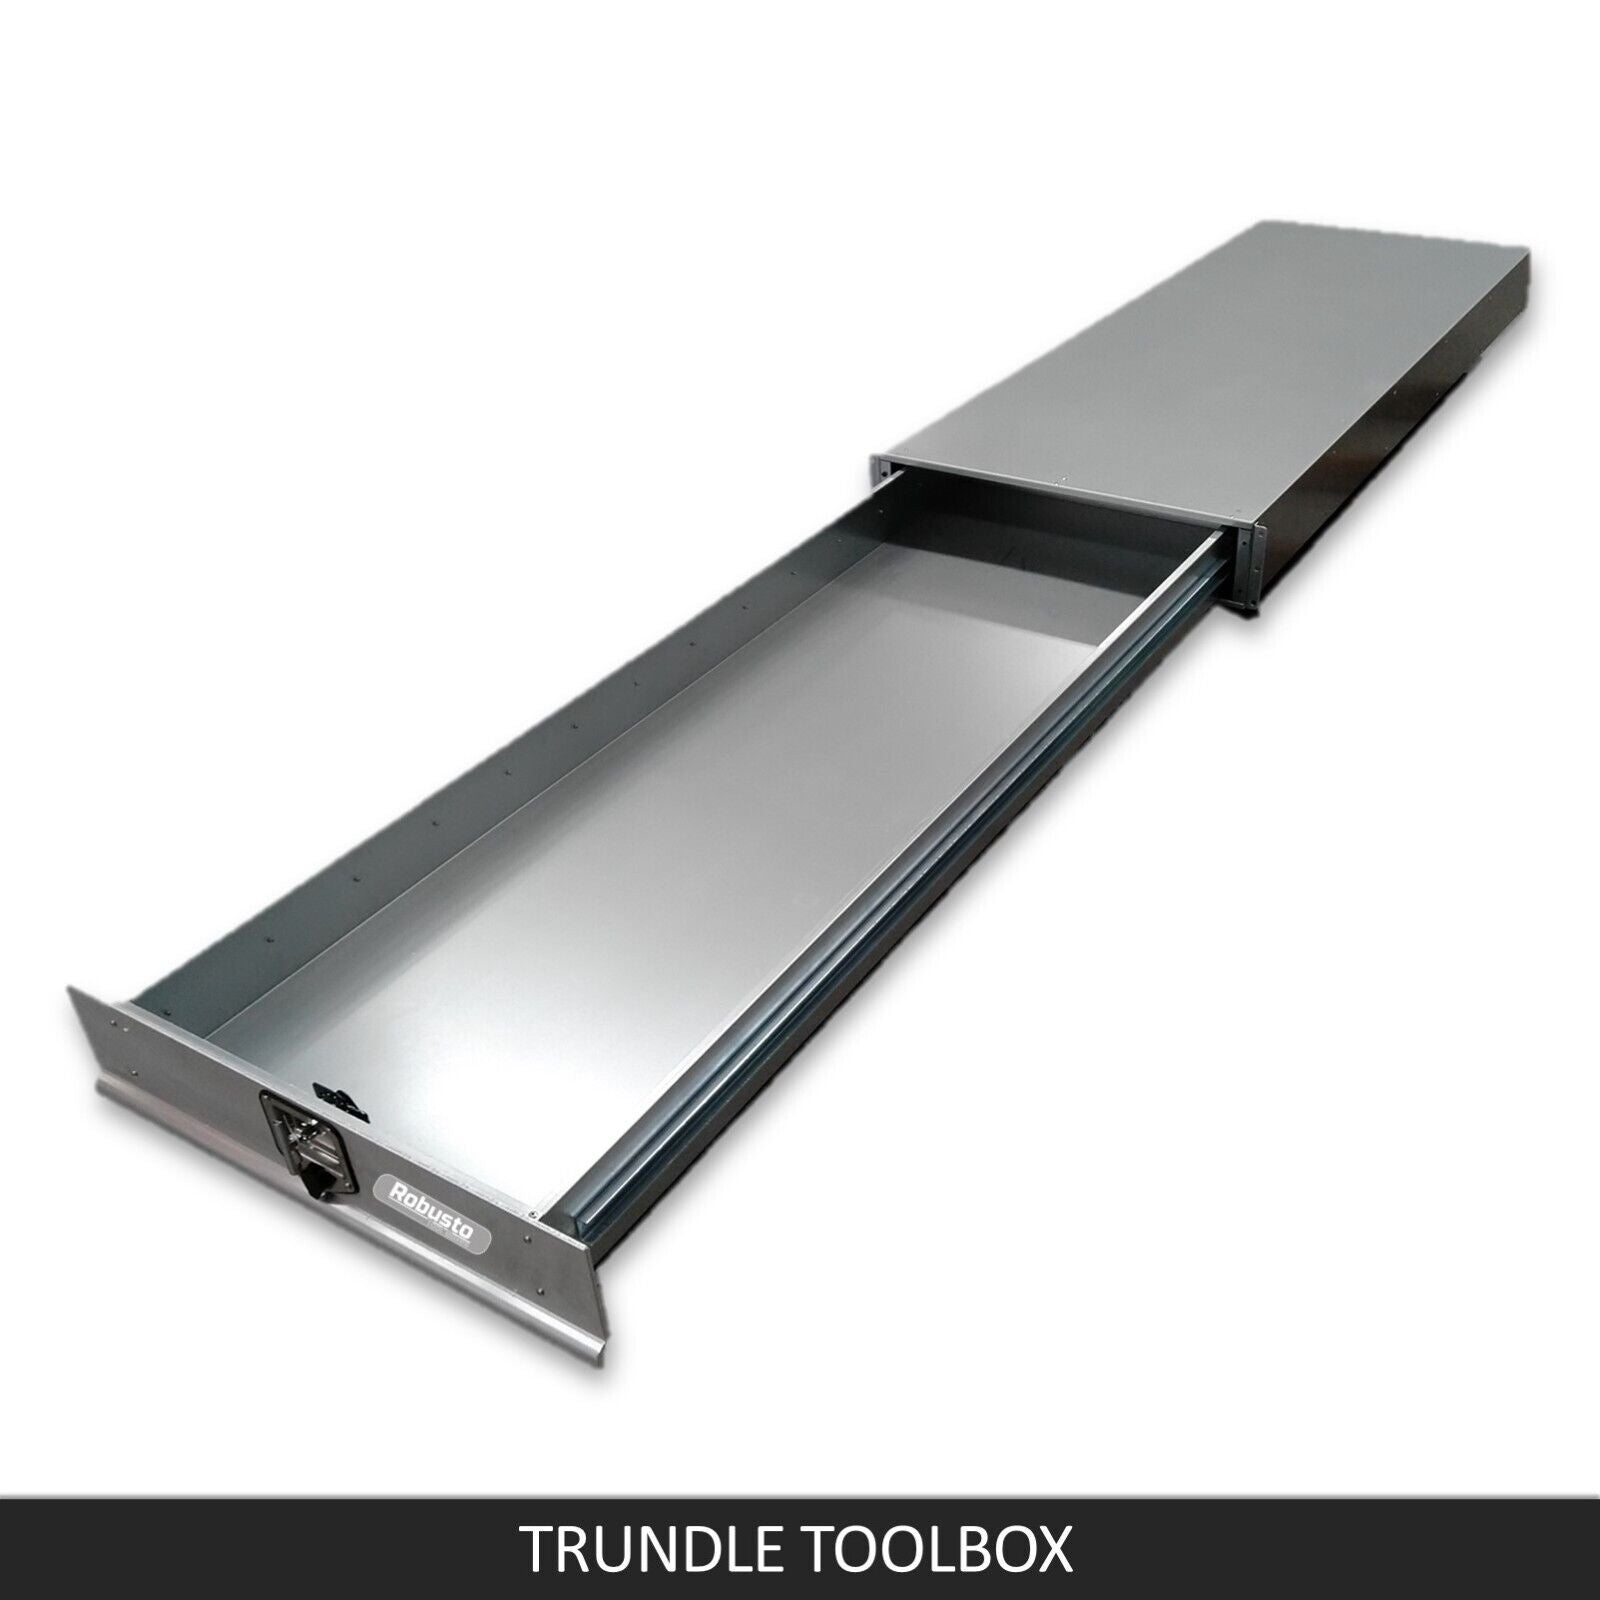 Under Tray Tool Box Trundle Drawer 1500 mm UTE Drawer Dual Extra Cab Toolbox - SILBERSHELL